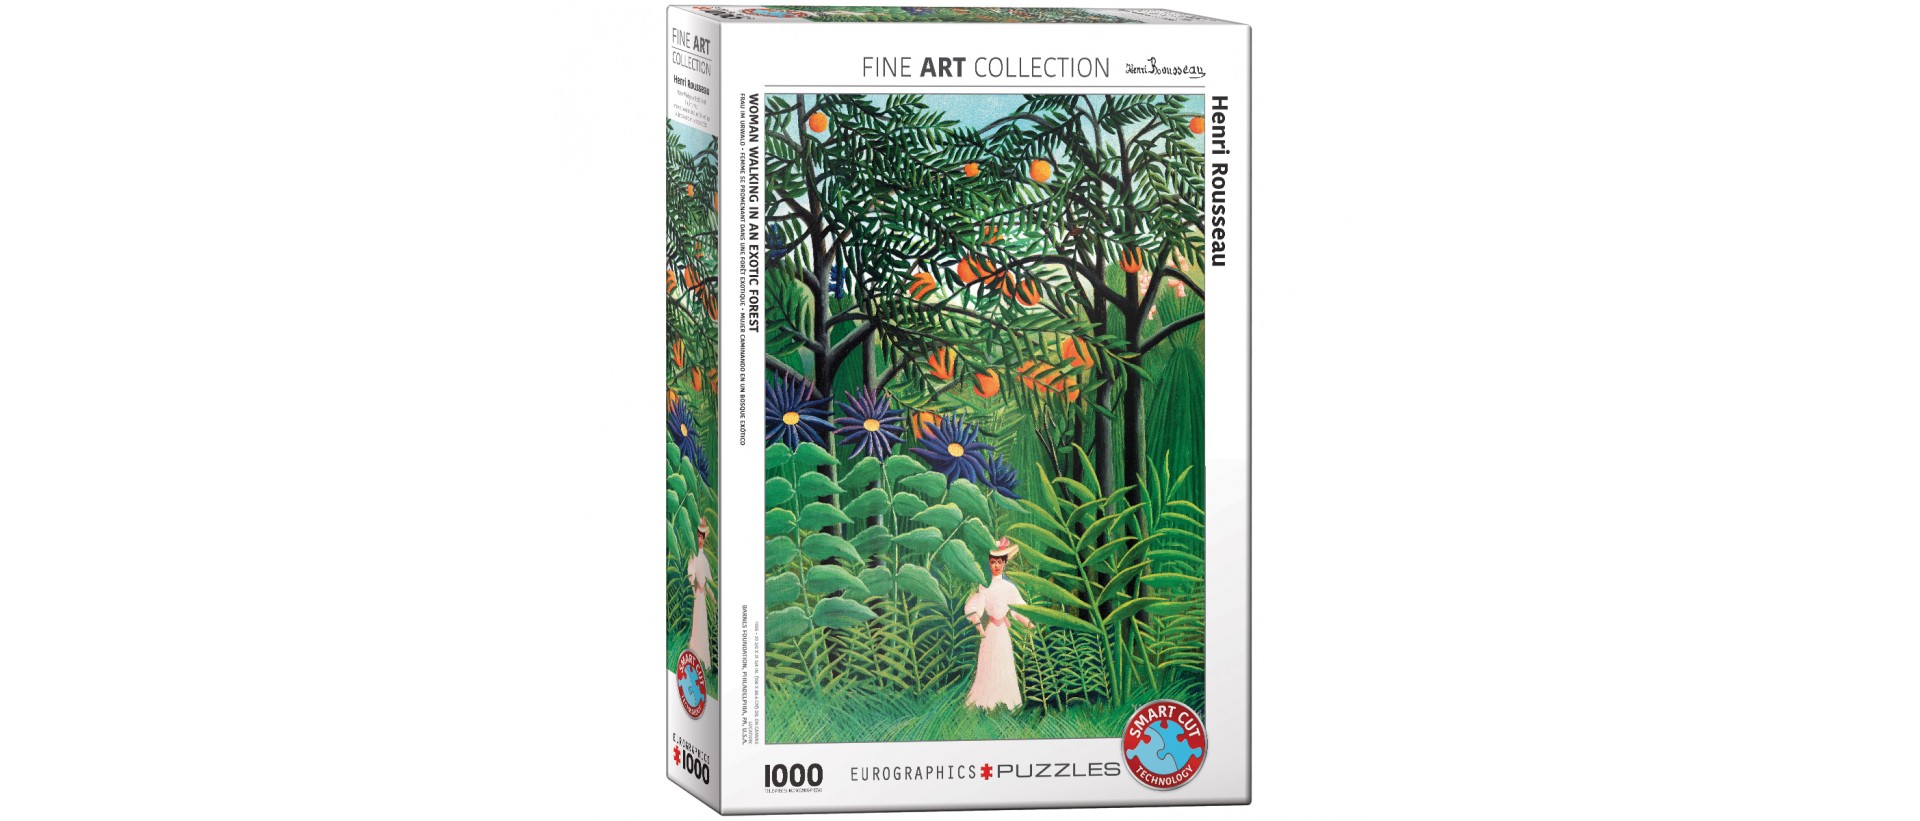 Woman Walking in an Exotic Forest - Puzzle Eurographics 6000-5608